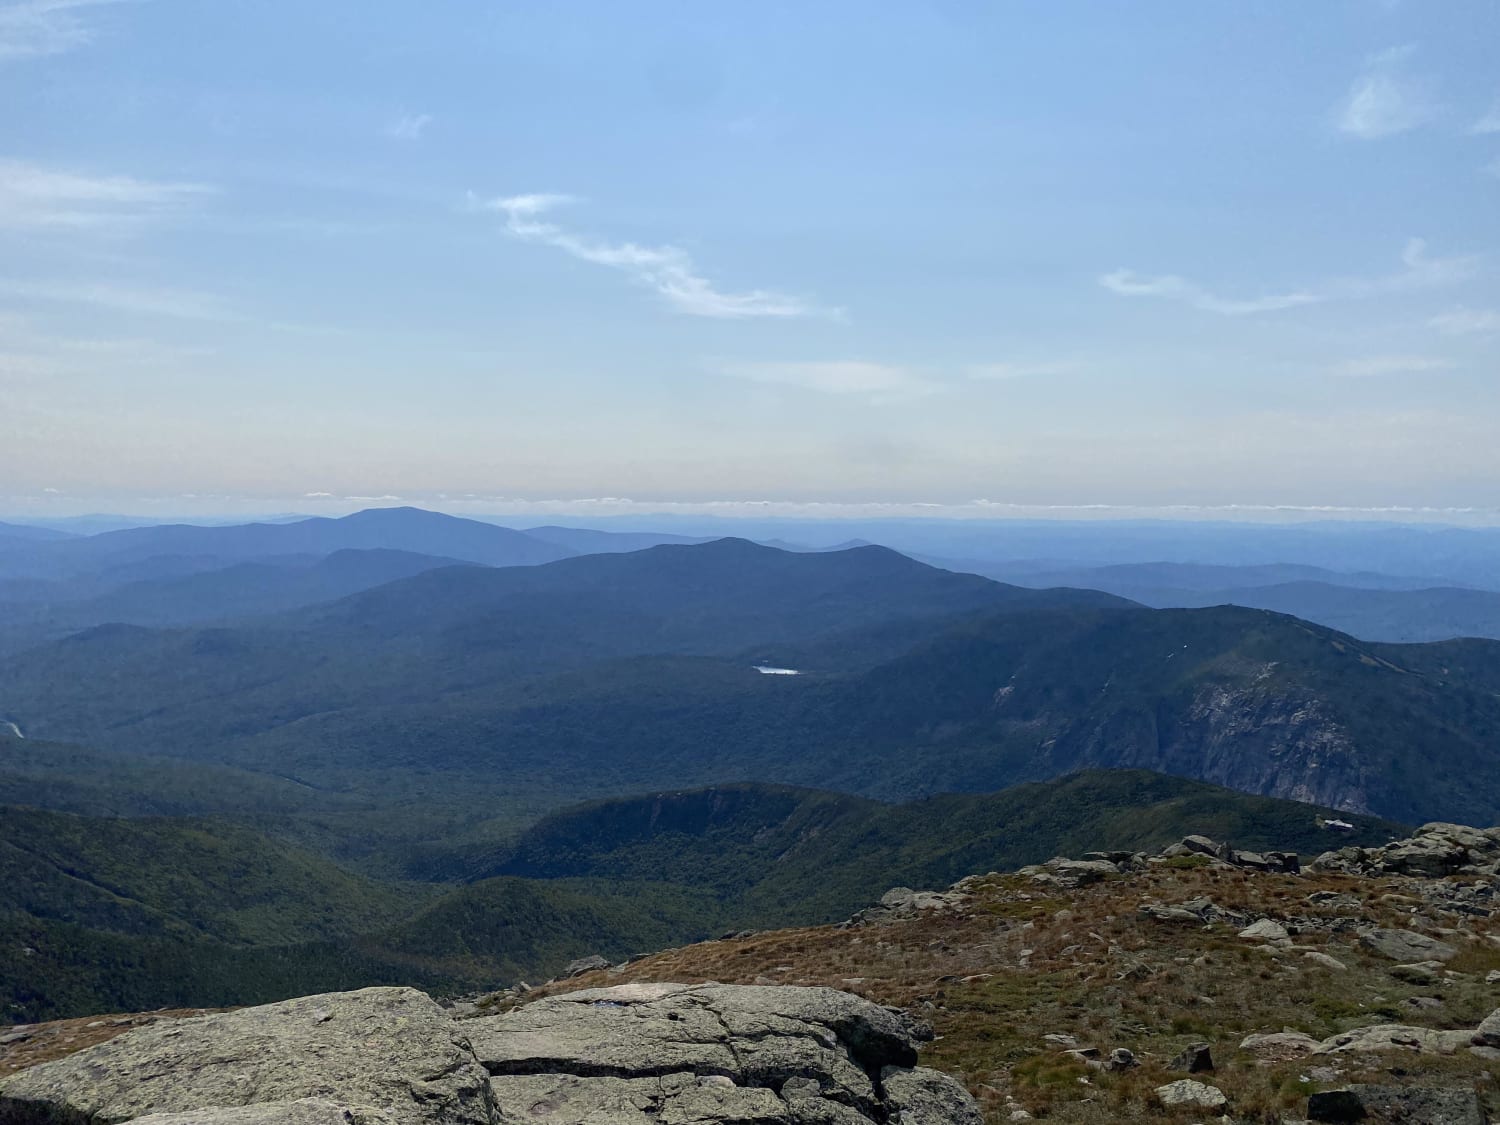 It’s been a rough year for me, this has been a great stress relief. My first real hike! Mount Lafayette in New Hampshire